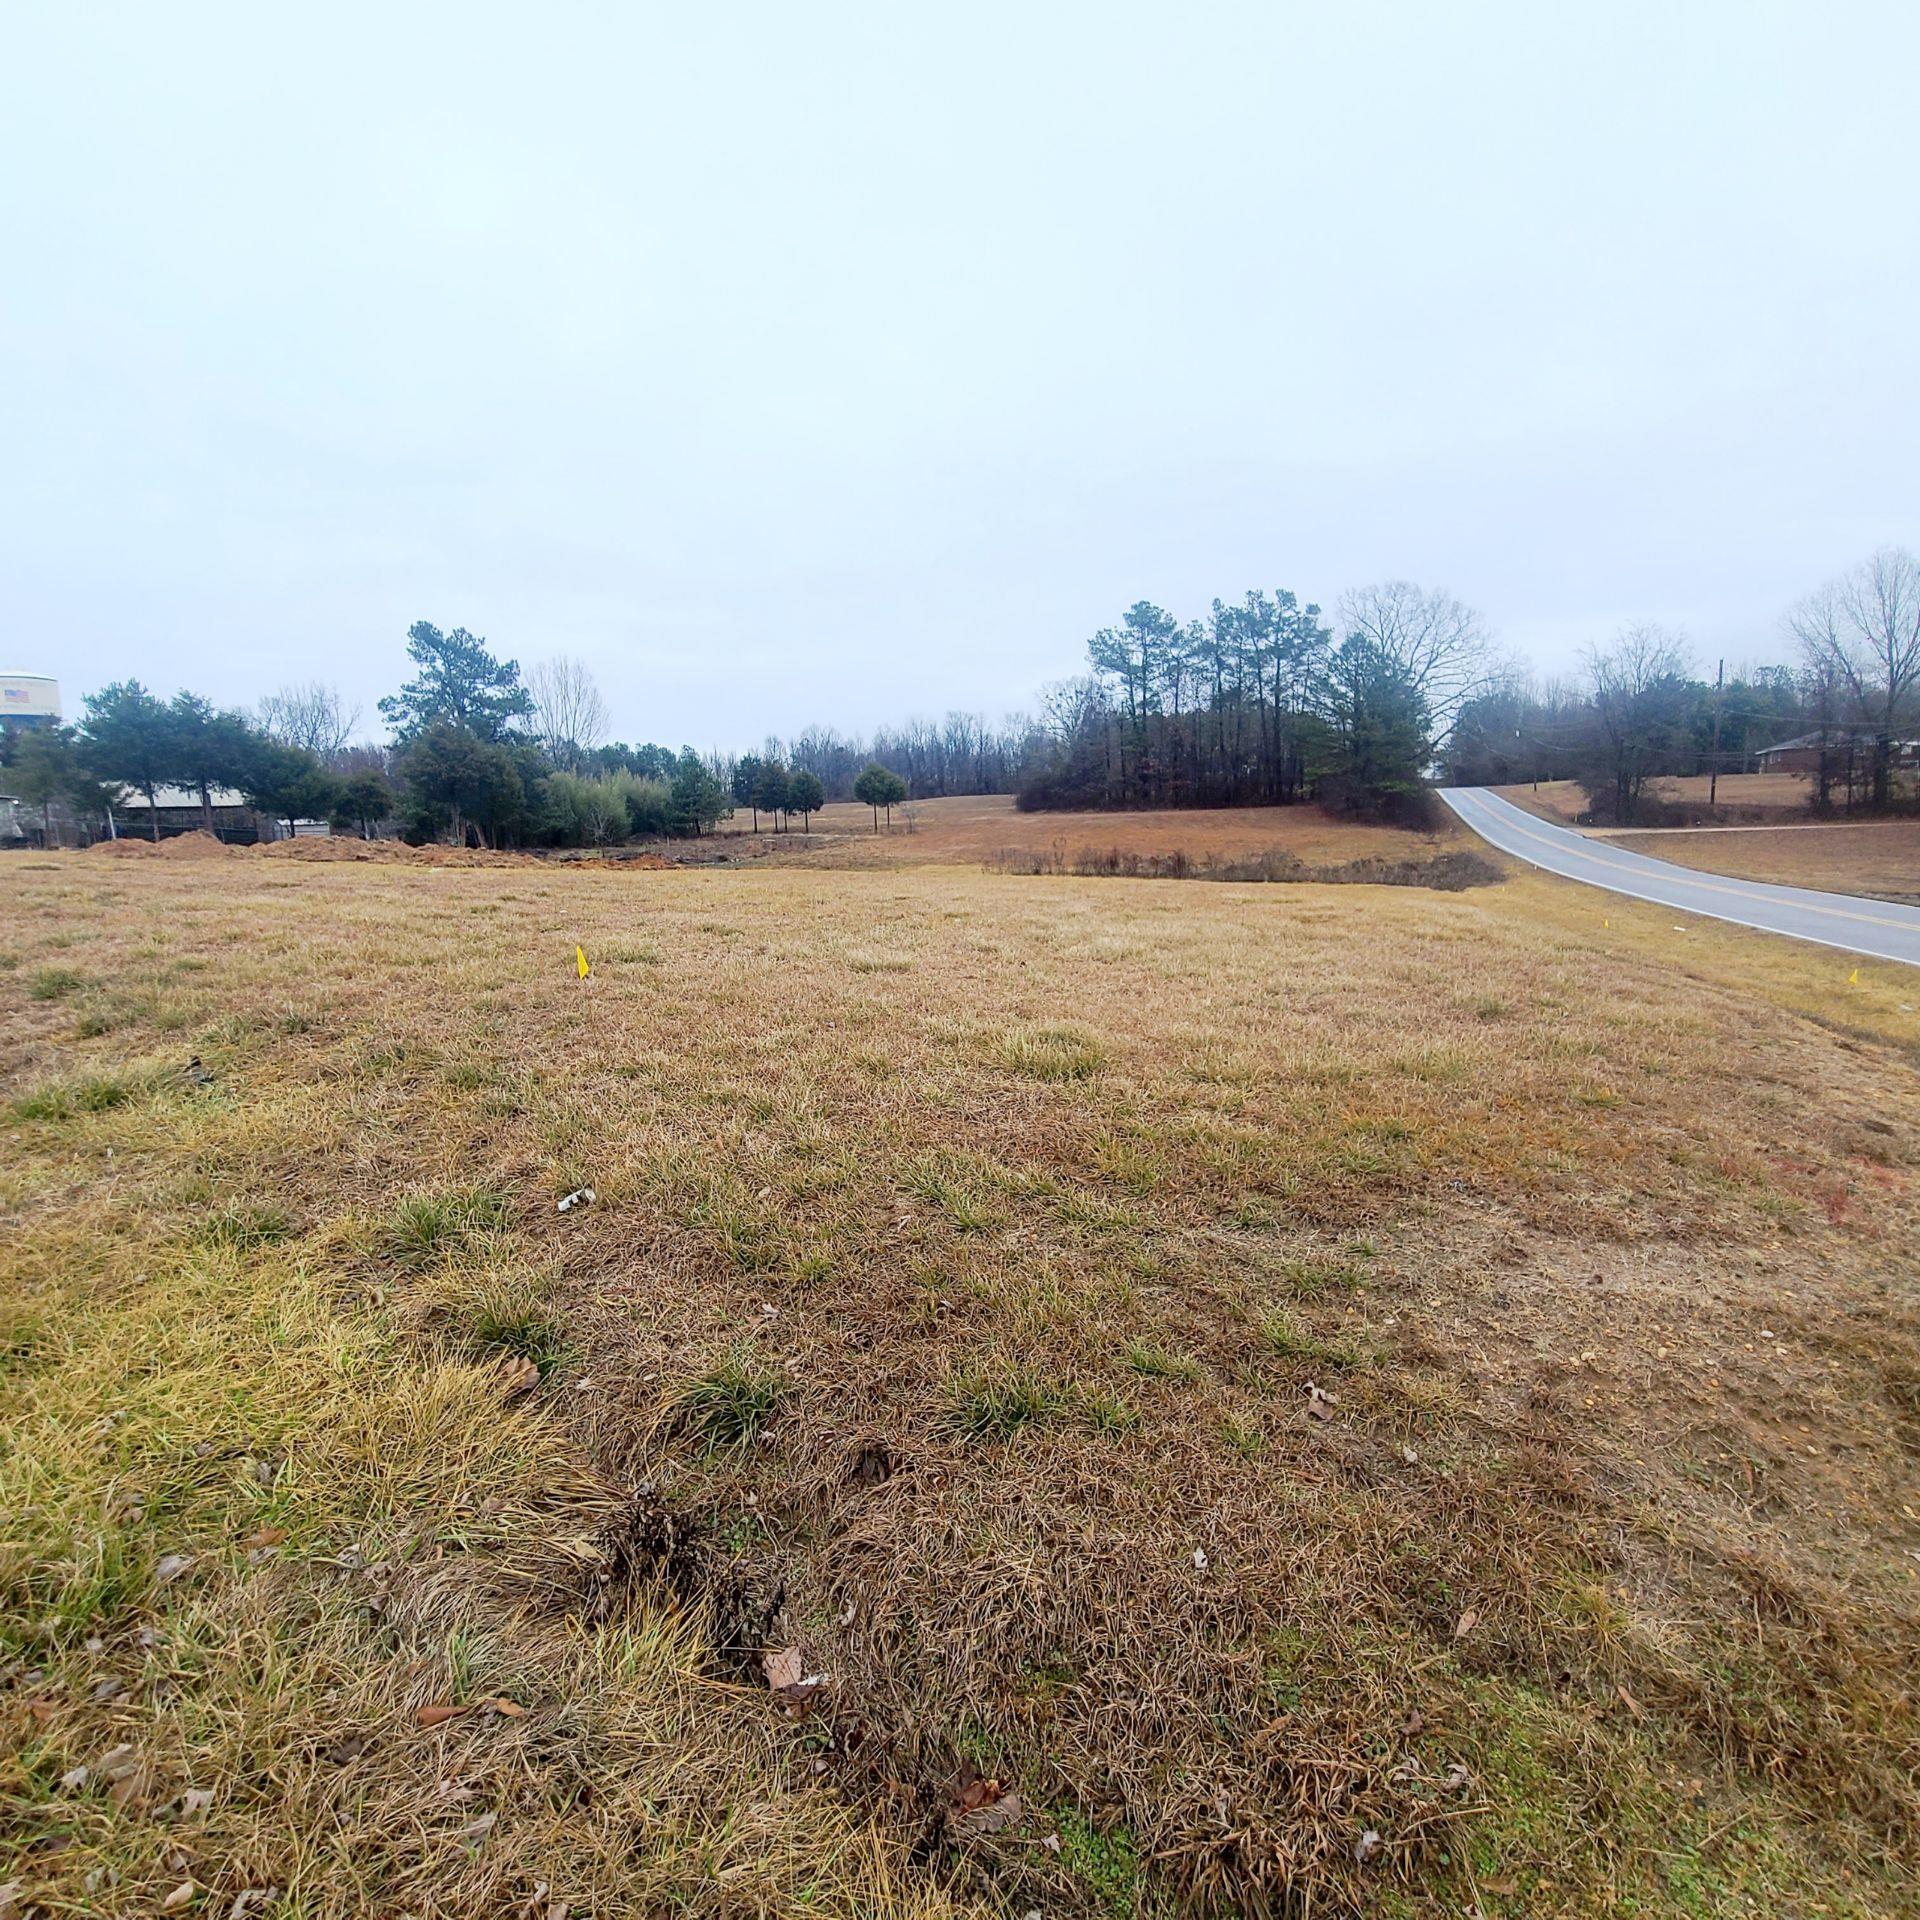 1.59 acres perfect location to build your home.  Close to town.  Hablo Espanol.  Buyer to verify all info.